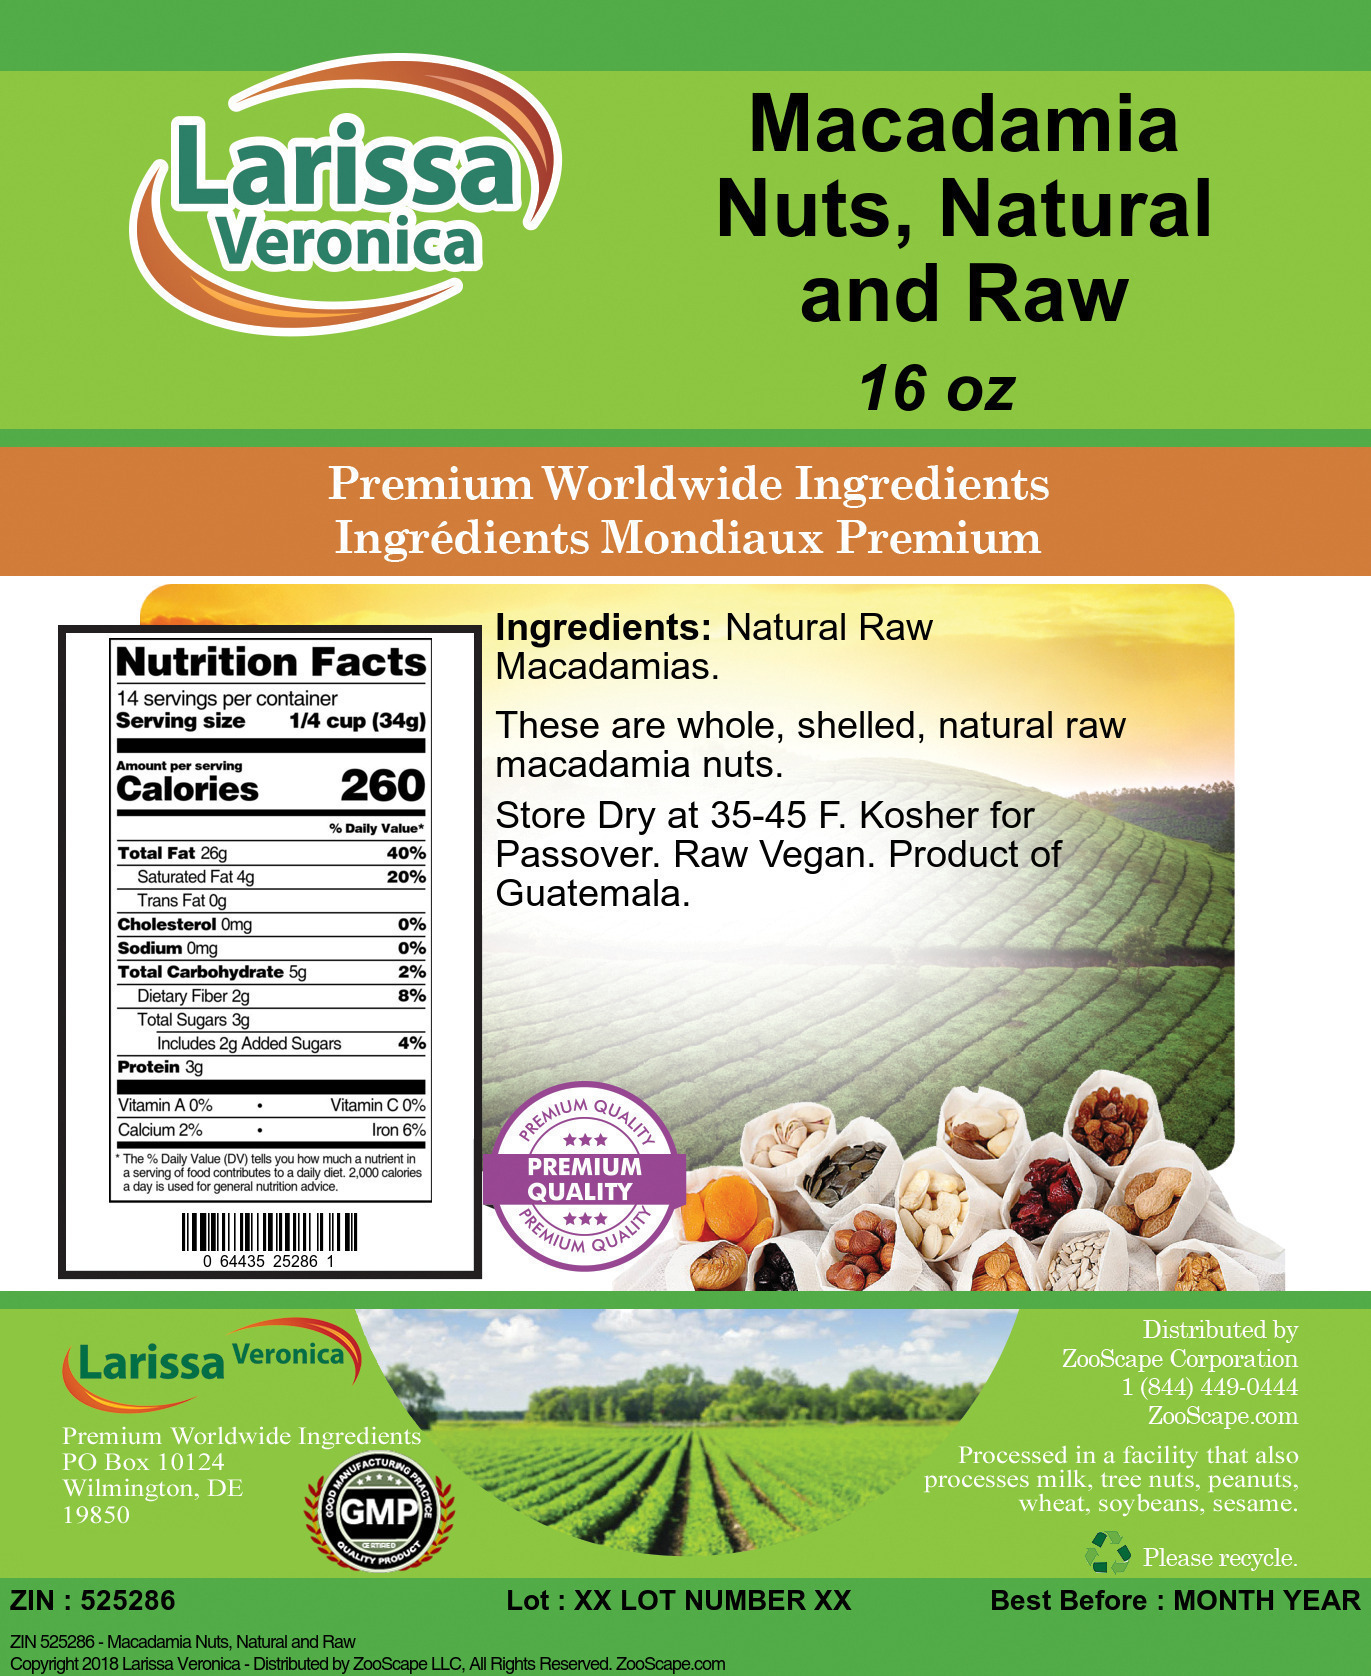 Macadamia Nuts, Natural and Raw - Label